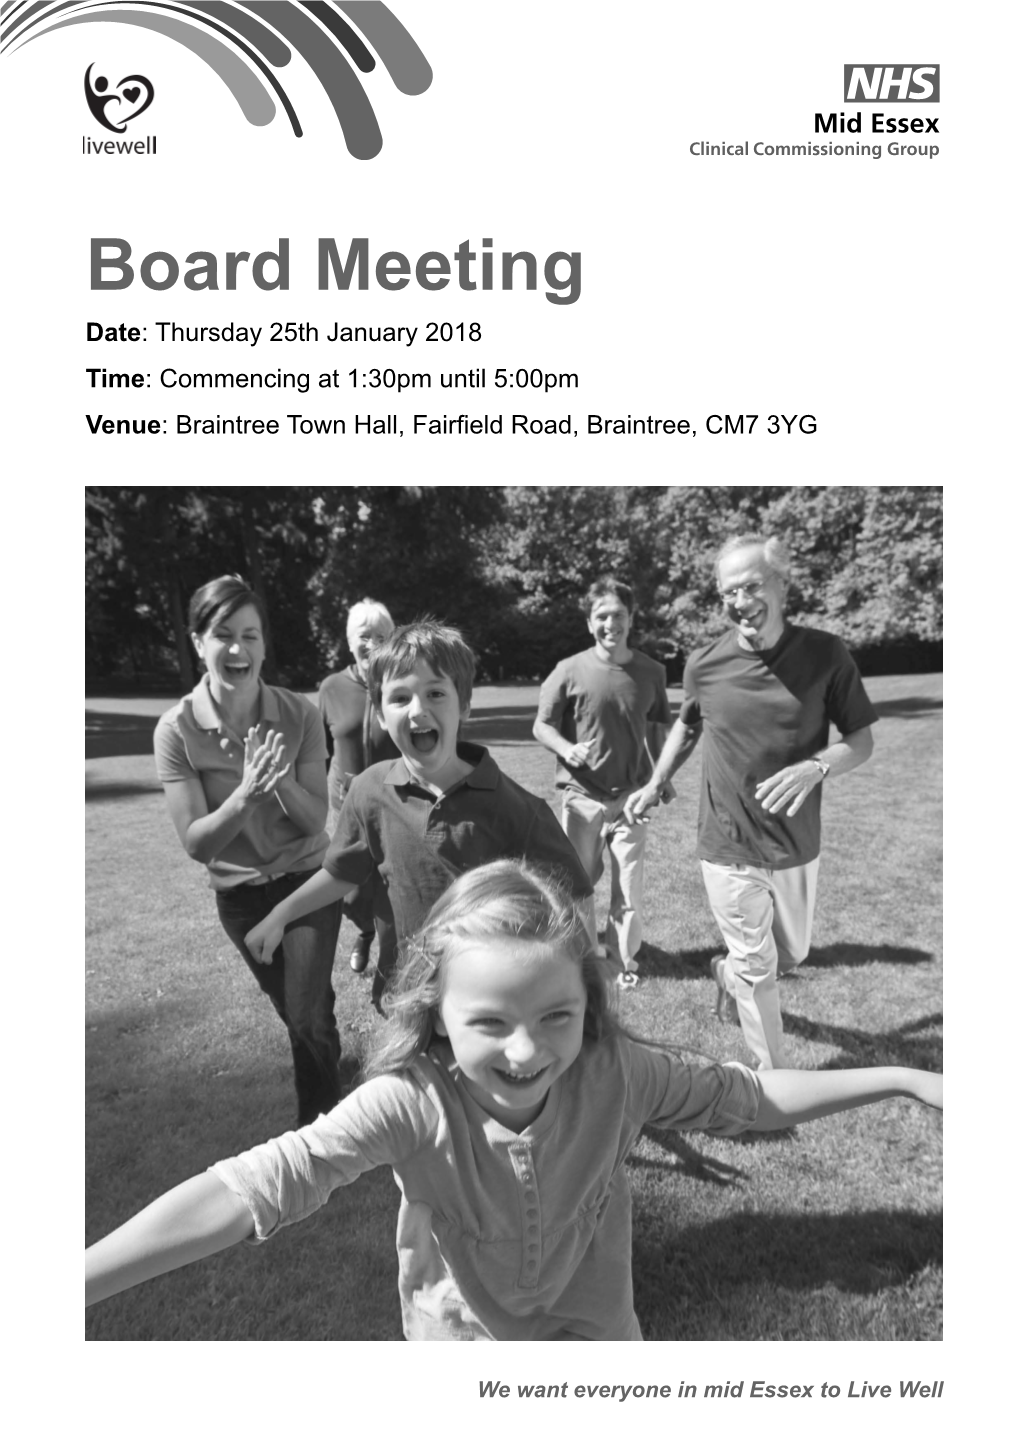 Board Meeting Date: Thursday 25Th January 2018 Time: Commencing at 1:30Pm Until 5:00Pm Venue: Braintree Town Hall, Fairfield Road, Braintree, CM7 3YG